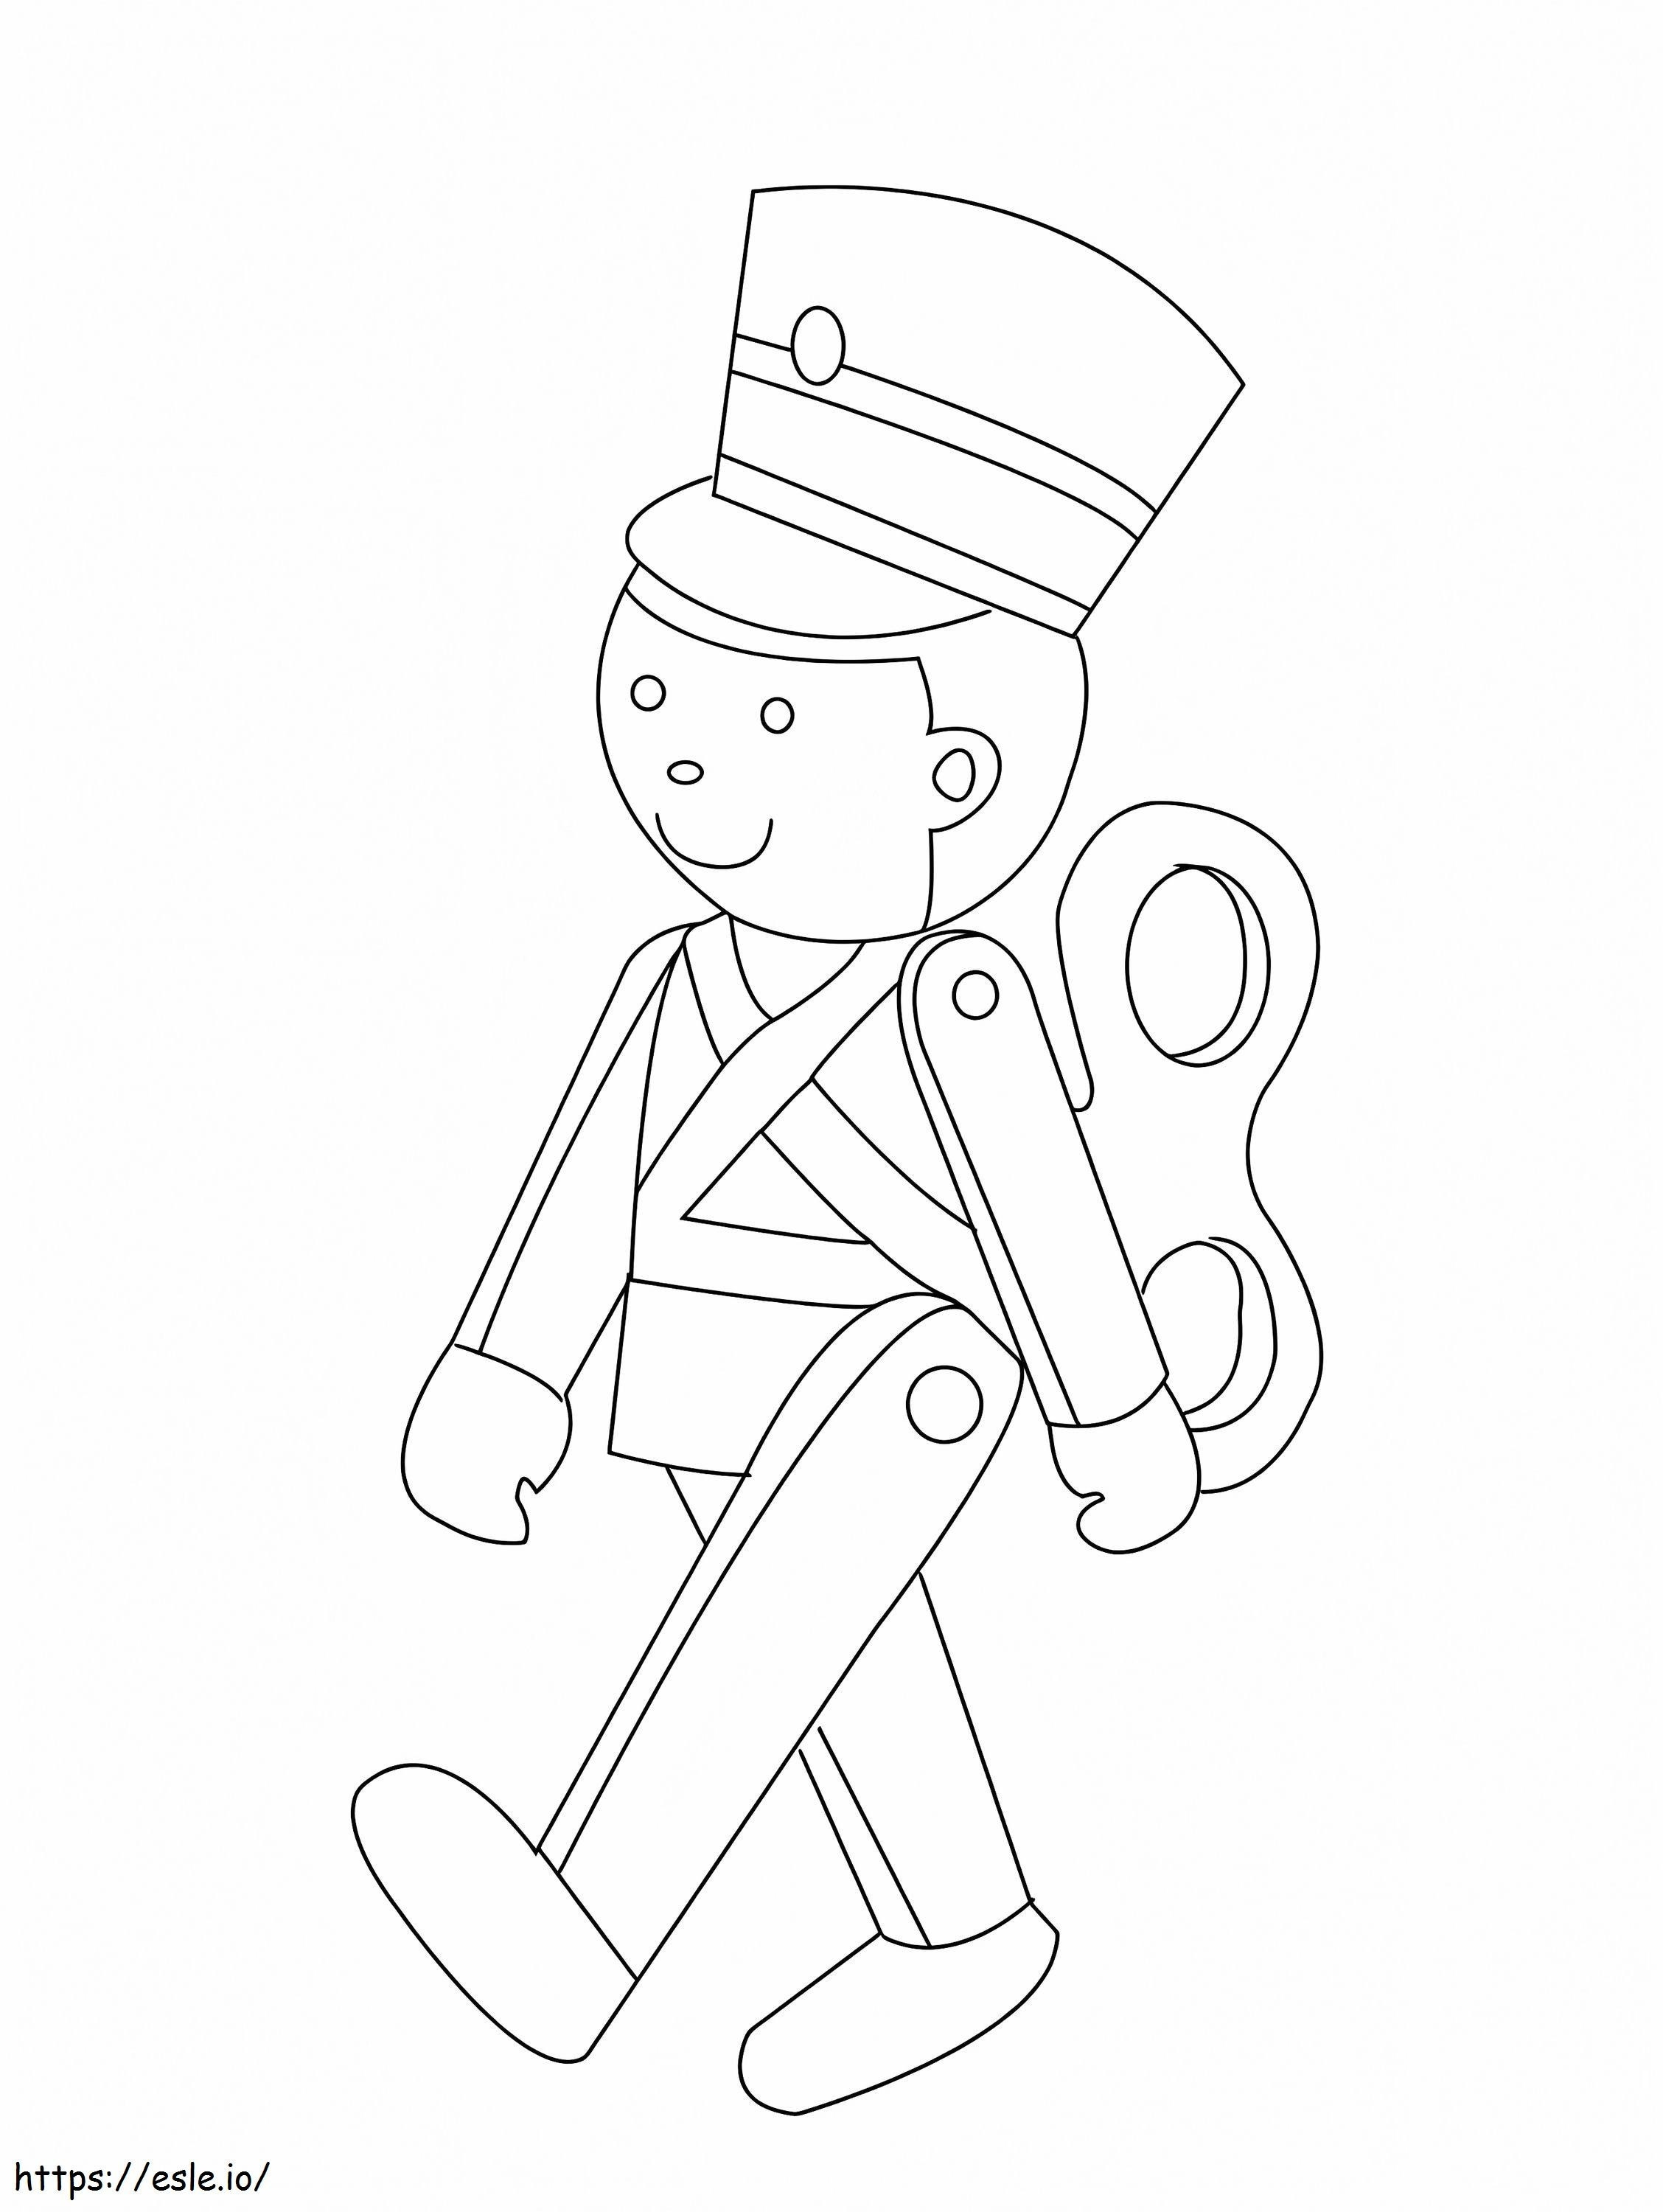 Walking Toy Soldier coloring page